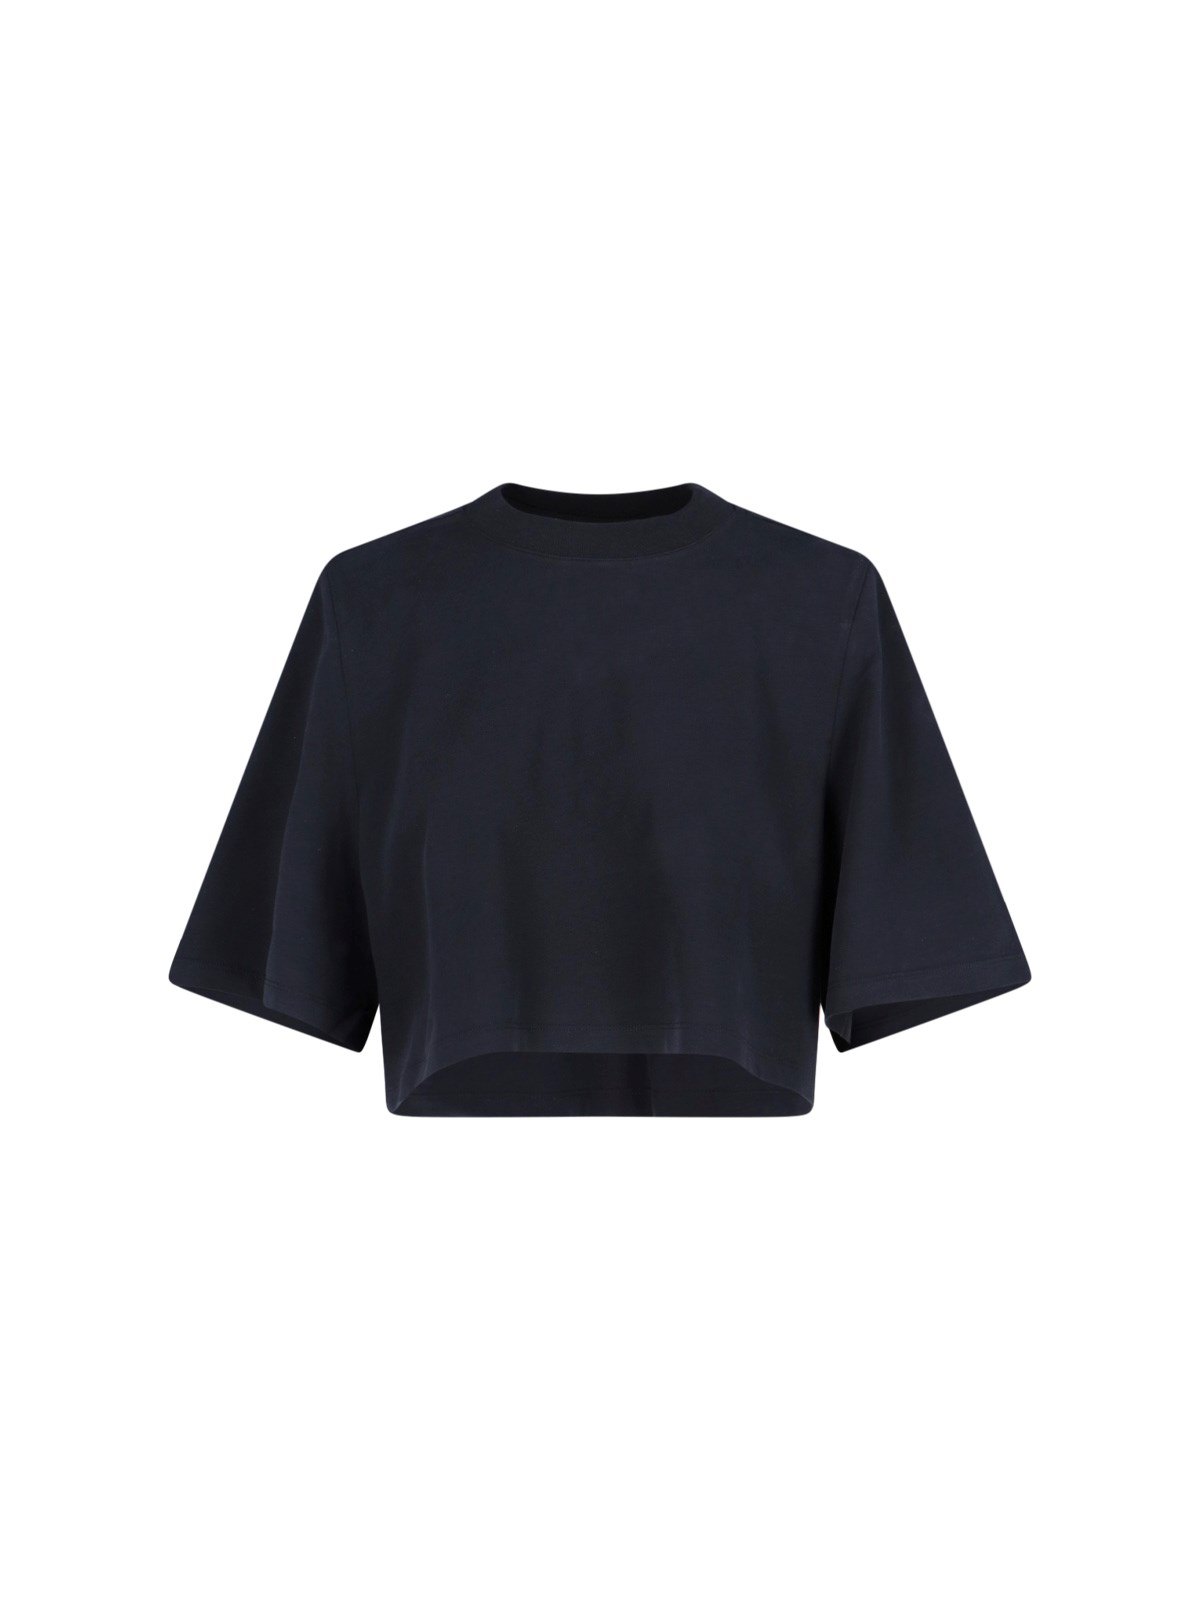 Isabel Marant Cropped T-shirt In Black  